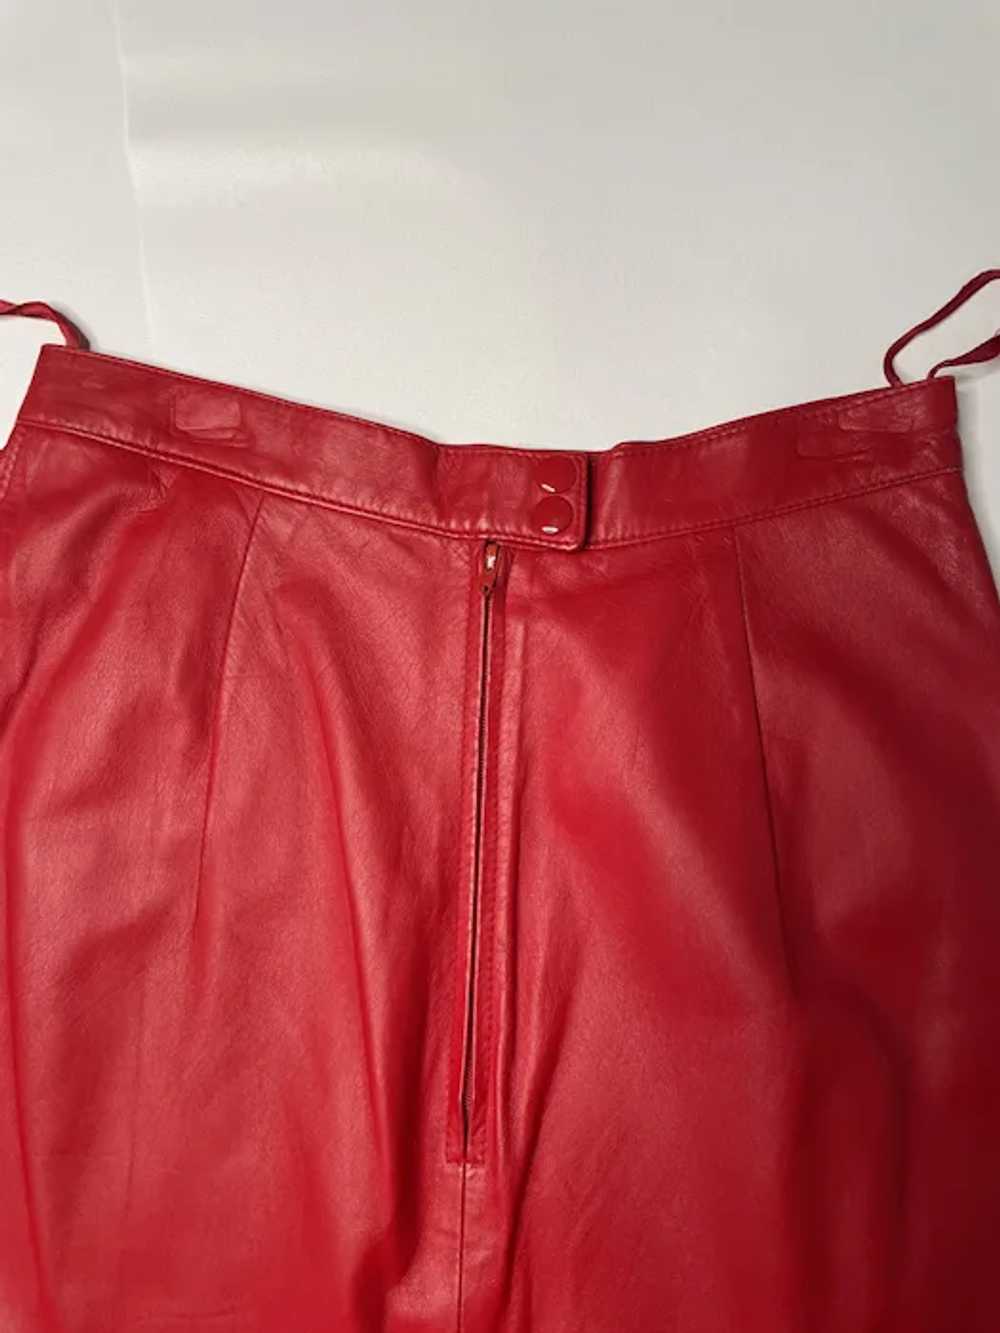 1980s Red Leather Mermaid Fishtail Skirt Trumpet … - image 8